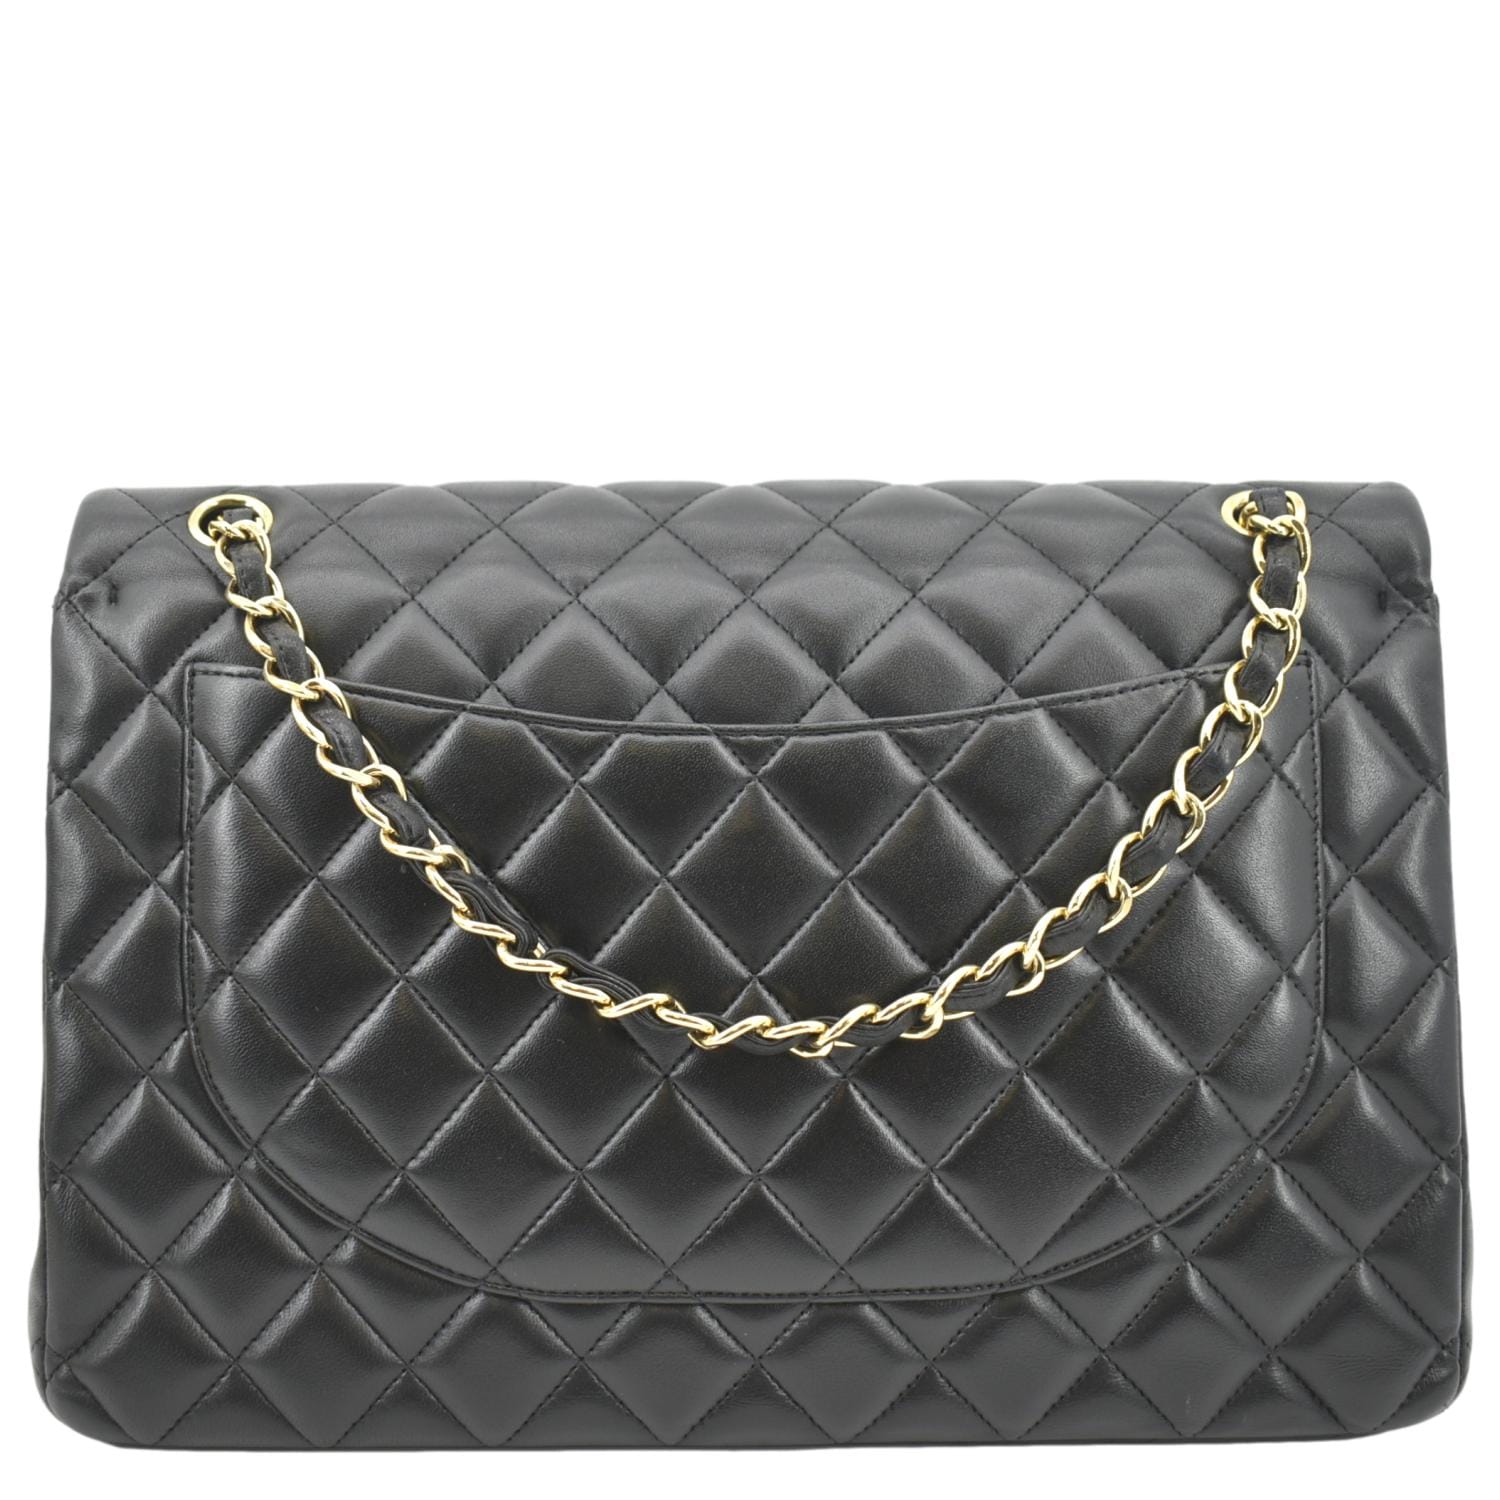 Buy Chanel Bags Authentic Online In India -  India